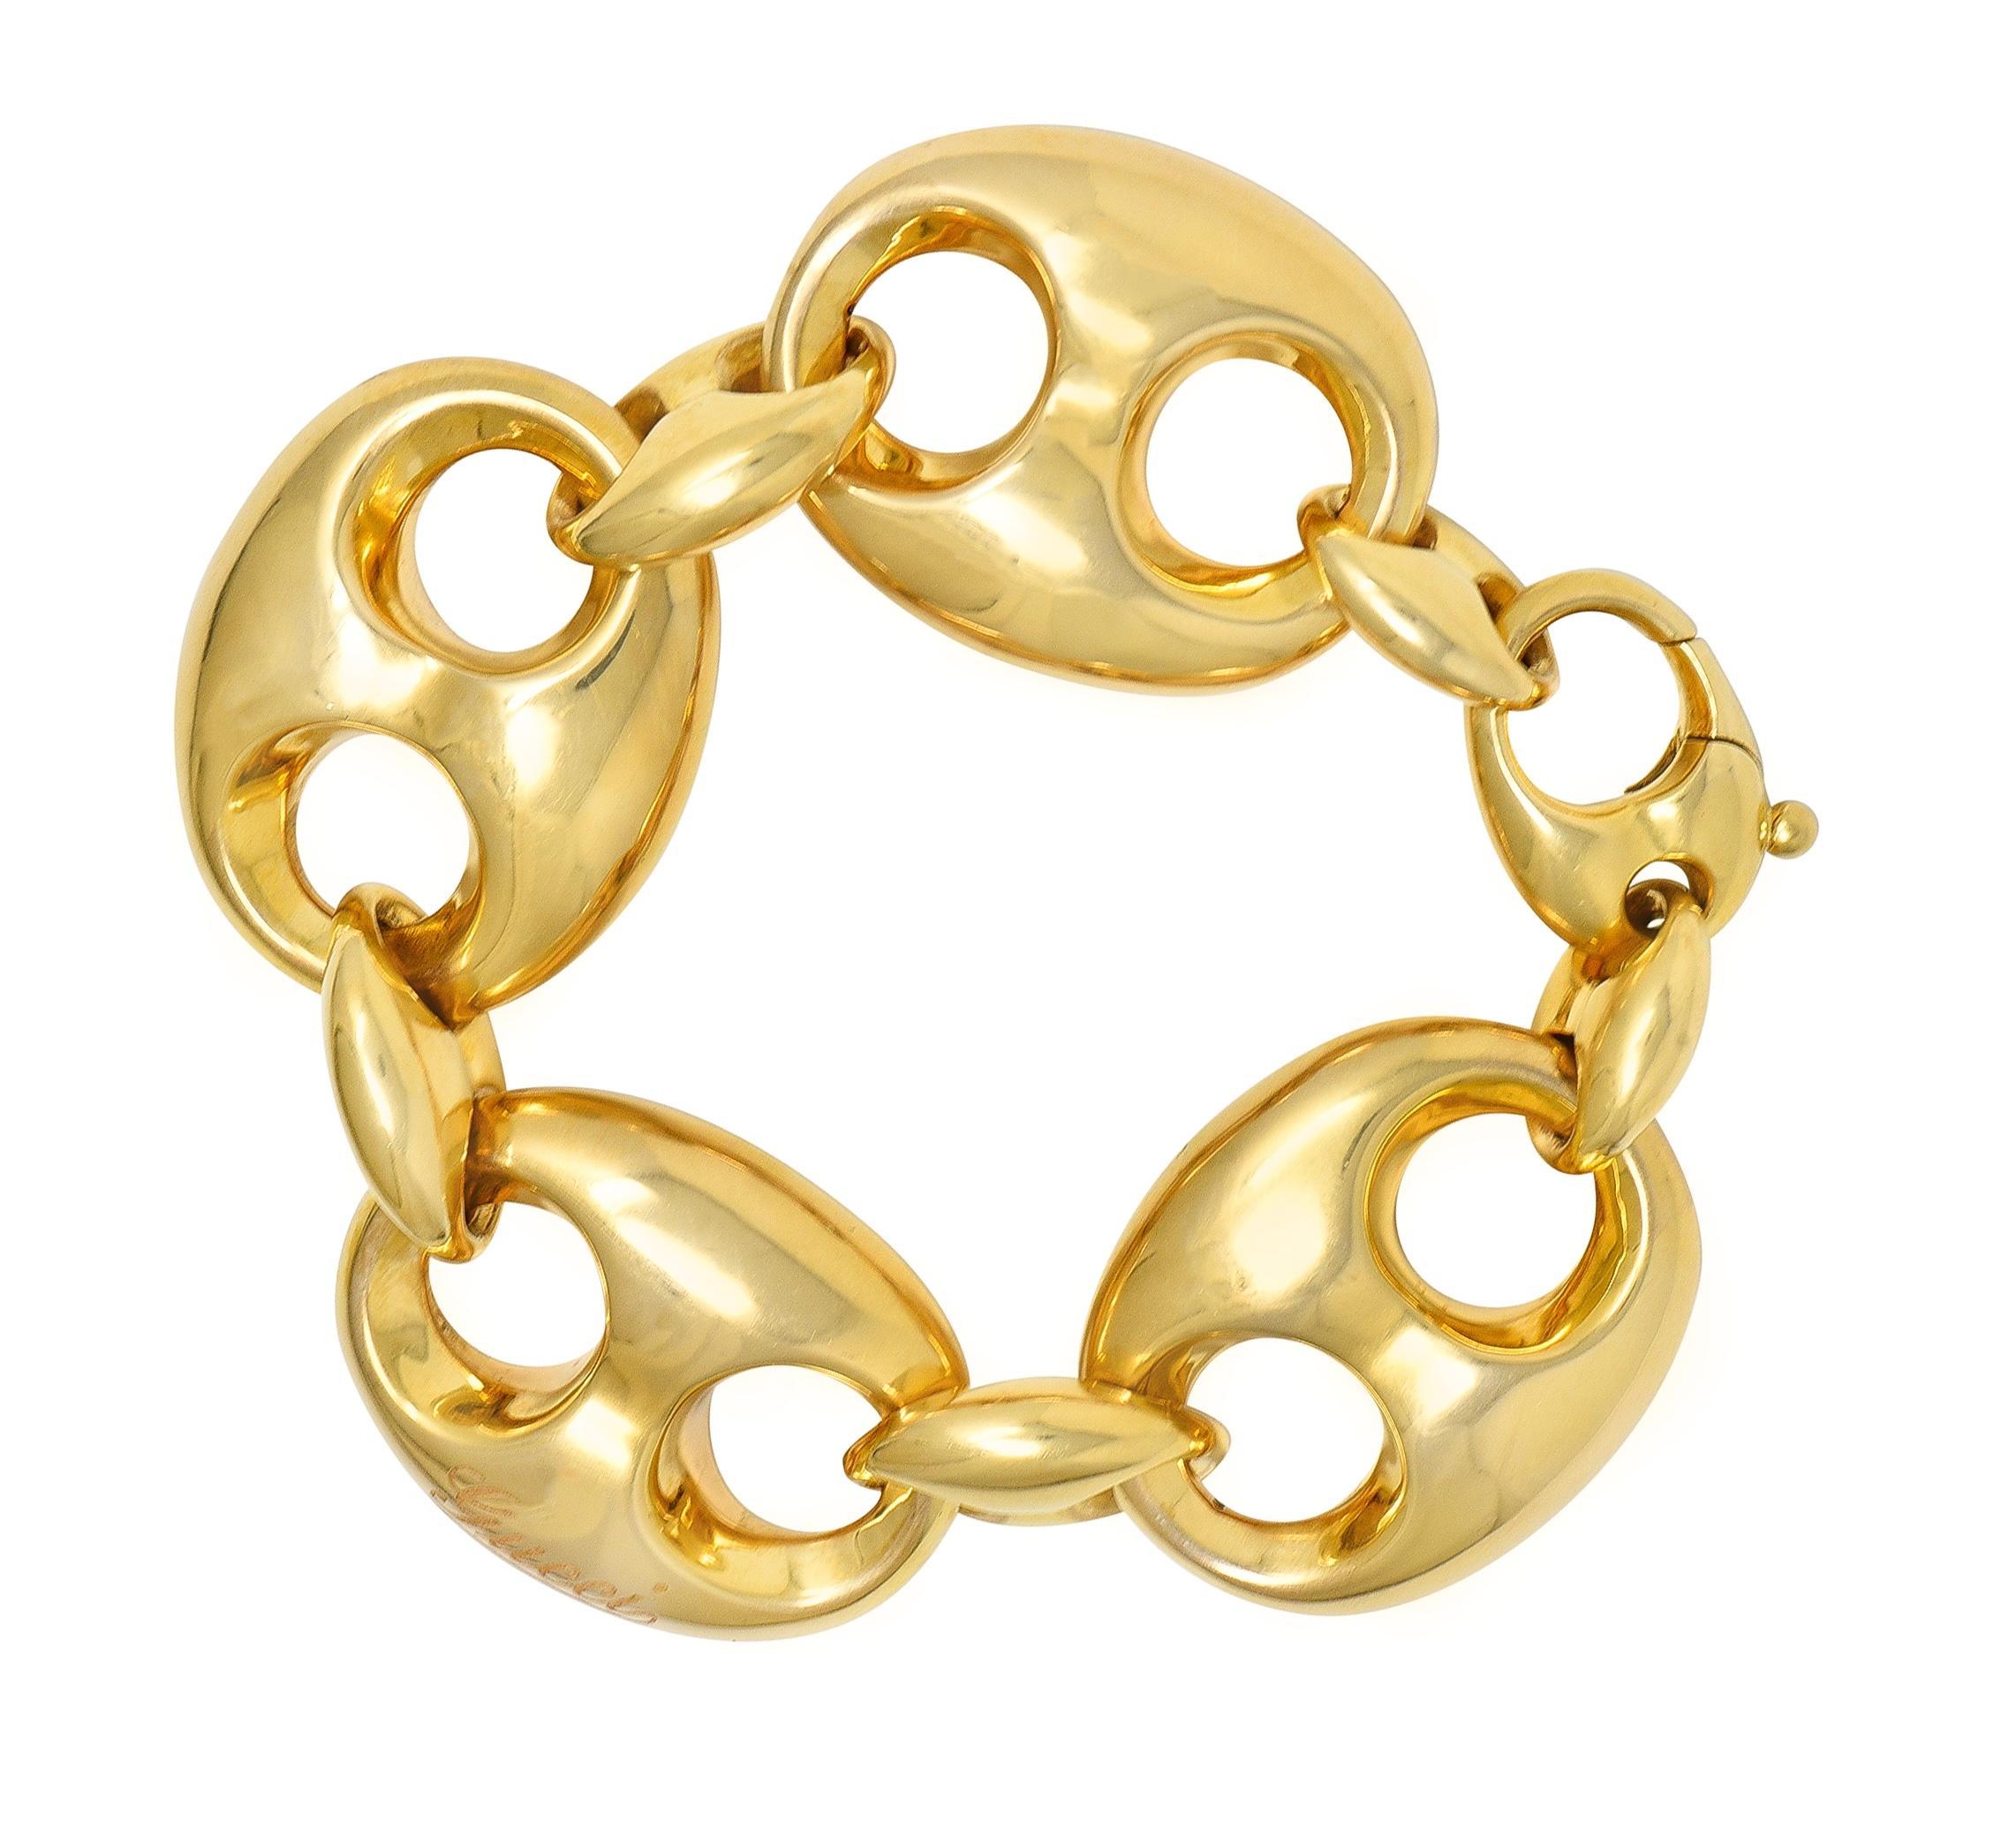 Designed as a stylized link bracelet with alternating large and small mariner links 
Puffy in style with high polish finish
Completed by stylized lobster clasp closure
Stamped with Italian assay marks for 18 karat gold
Numbered and fully signed for